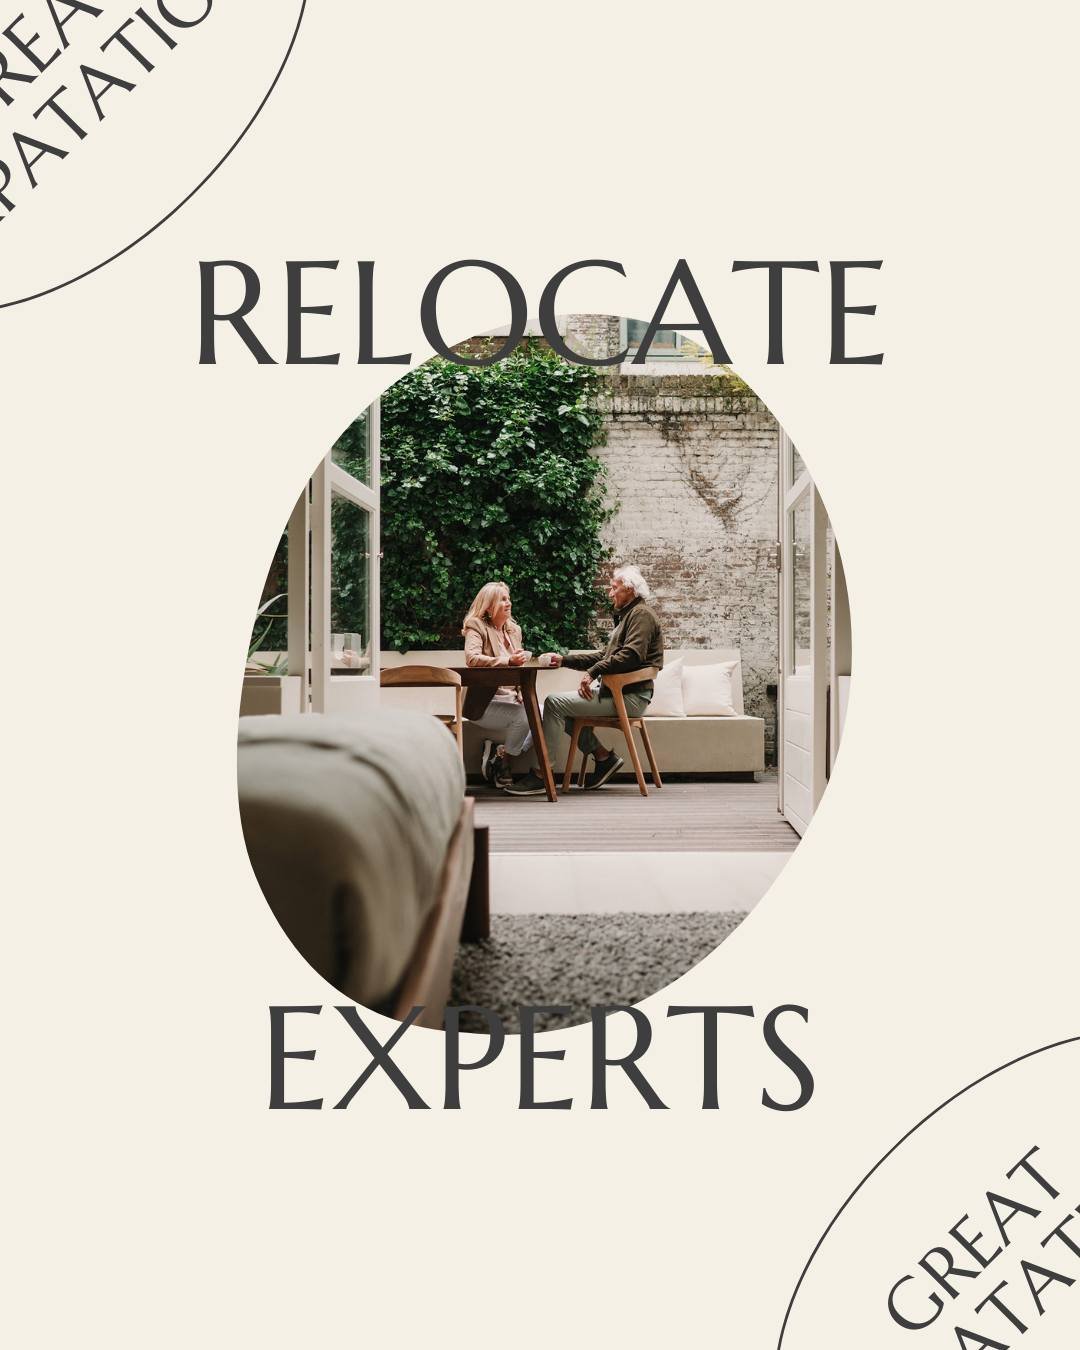 Embrace new beginnings with ease. Let our relocation experts create your perfect home-away-from-home experience. #Relocation #NewBeginnings #ExpertGuidance